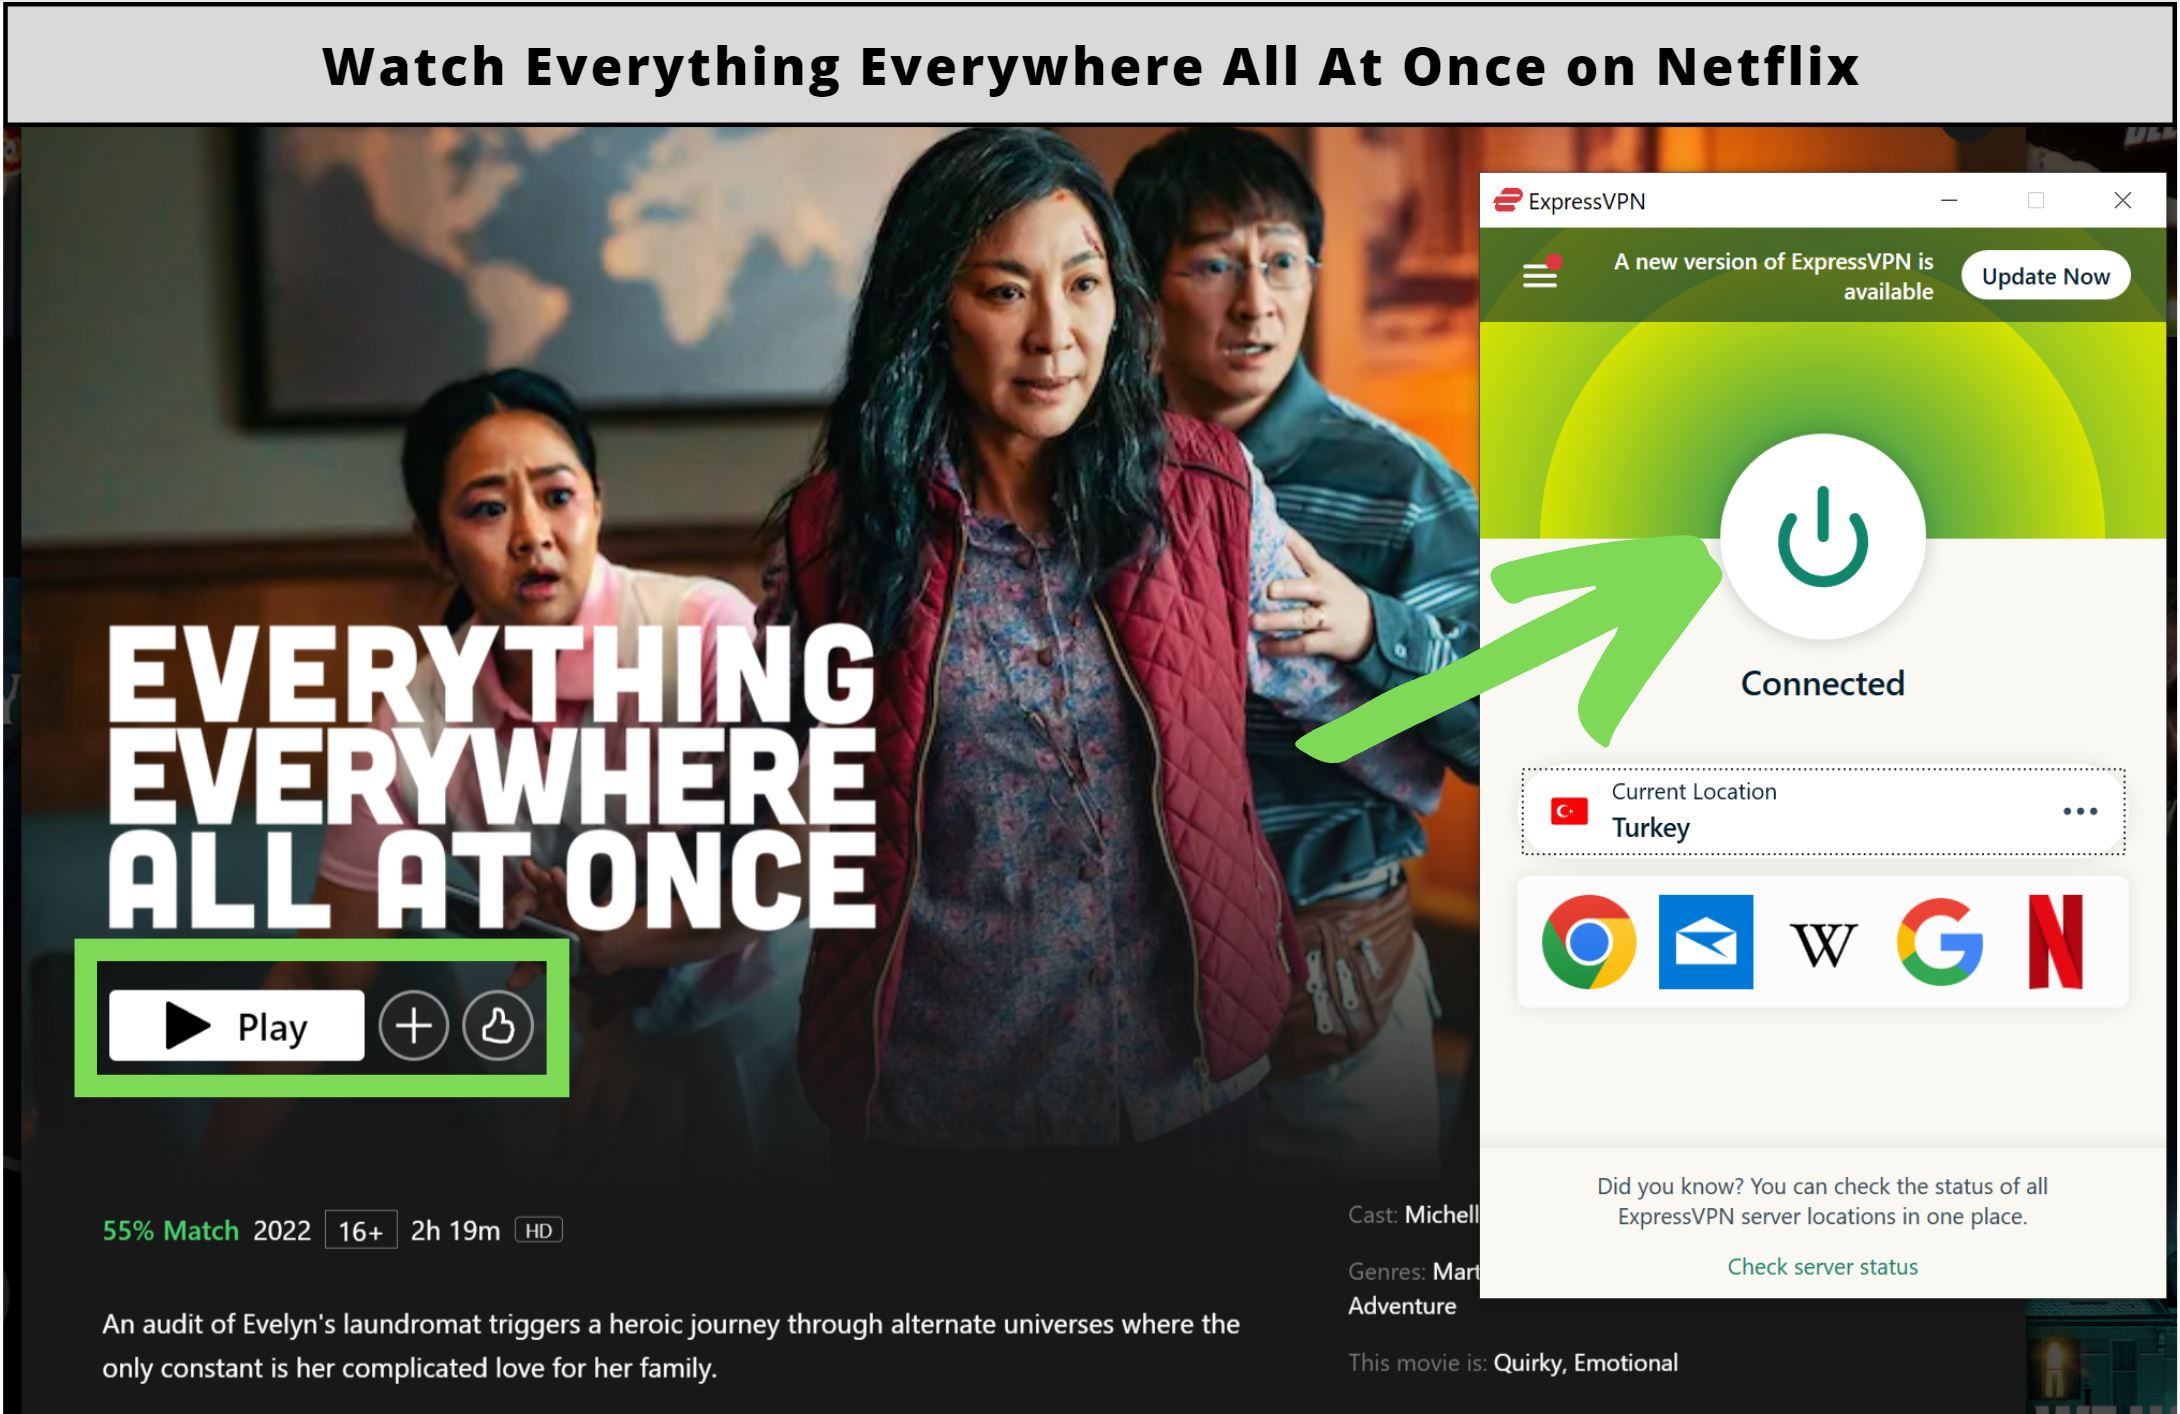 Is Everything Everywhere All At Once on Netflix?